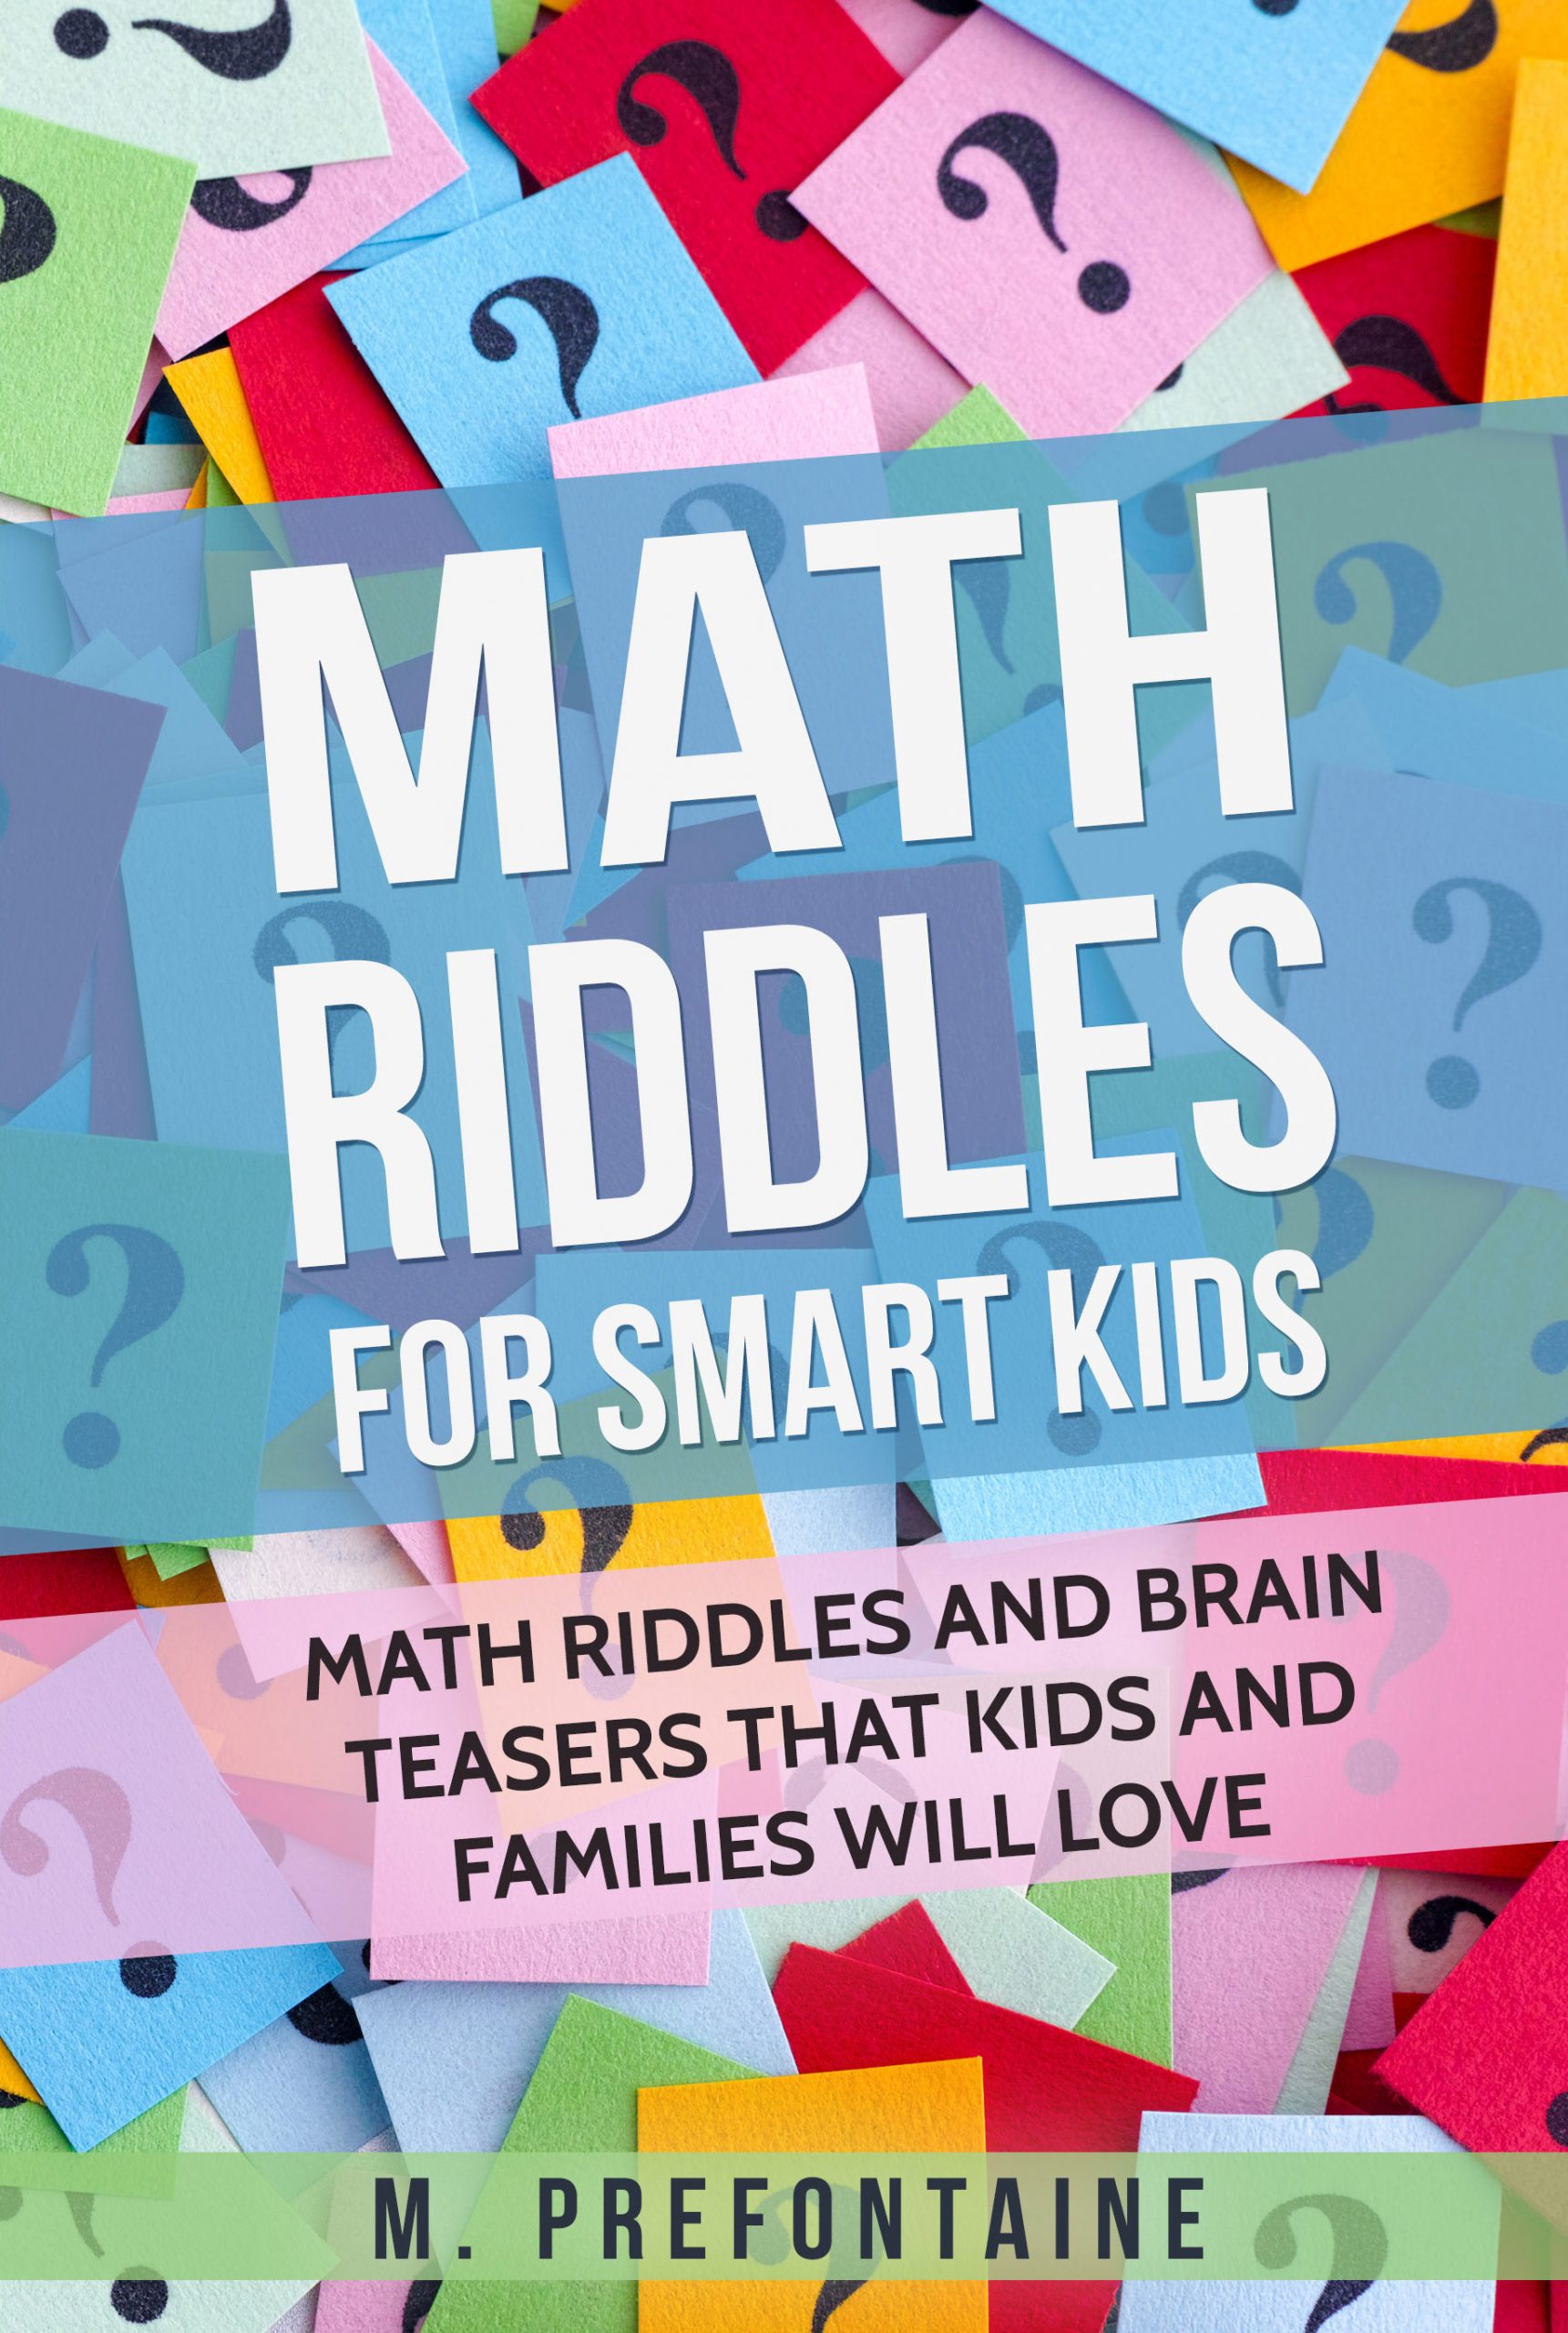 Math Riddles For Smart Kids by M. Prefontaine